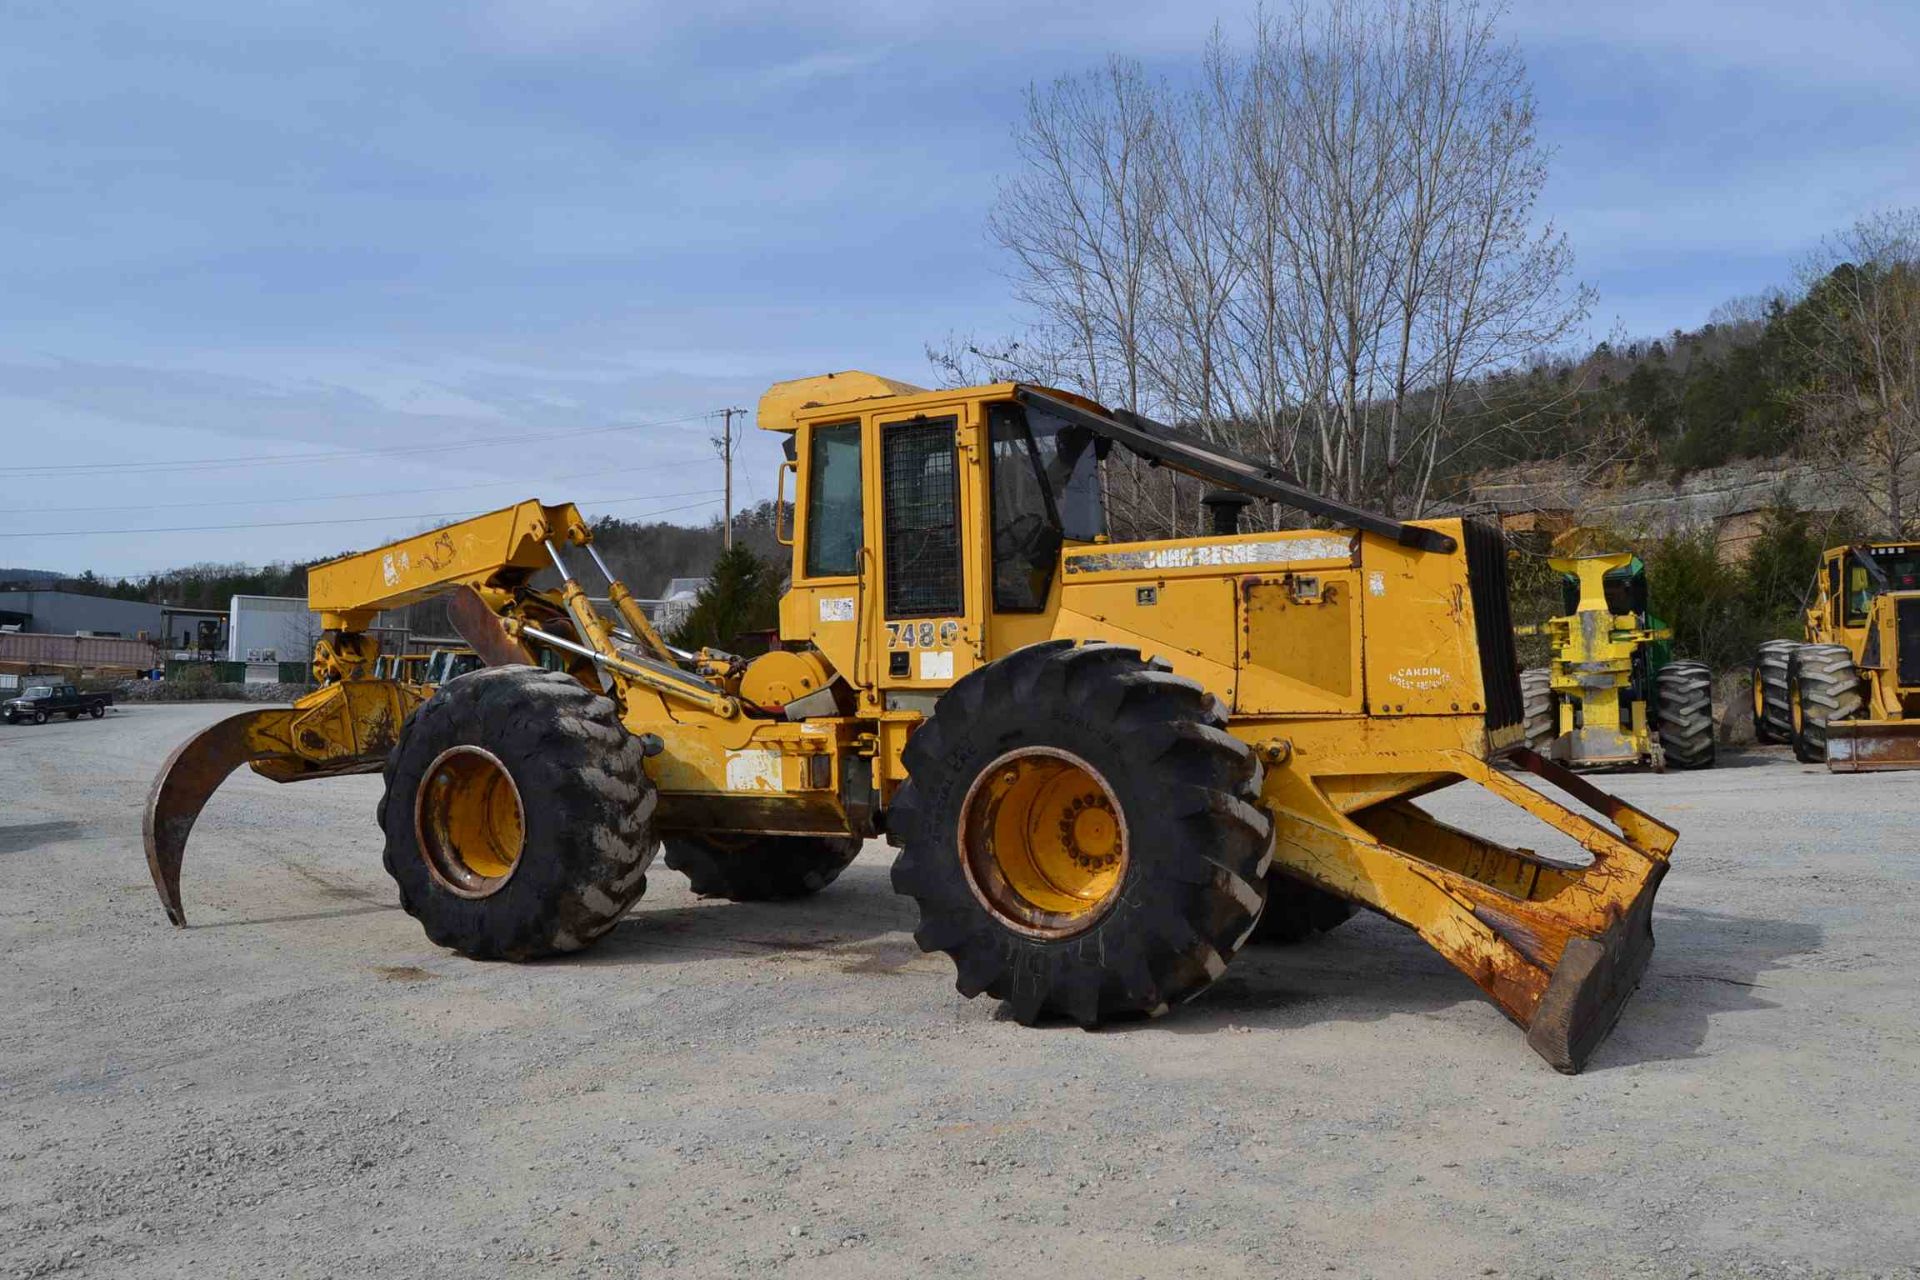 1998 JOHN DEERE 748G DUAL ARCH GRAPPLE SKIDDER W/30.5X32 RUBBER; S/N-565595; W/8,710 HOURS - Image 2 of 4